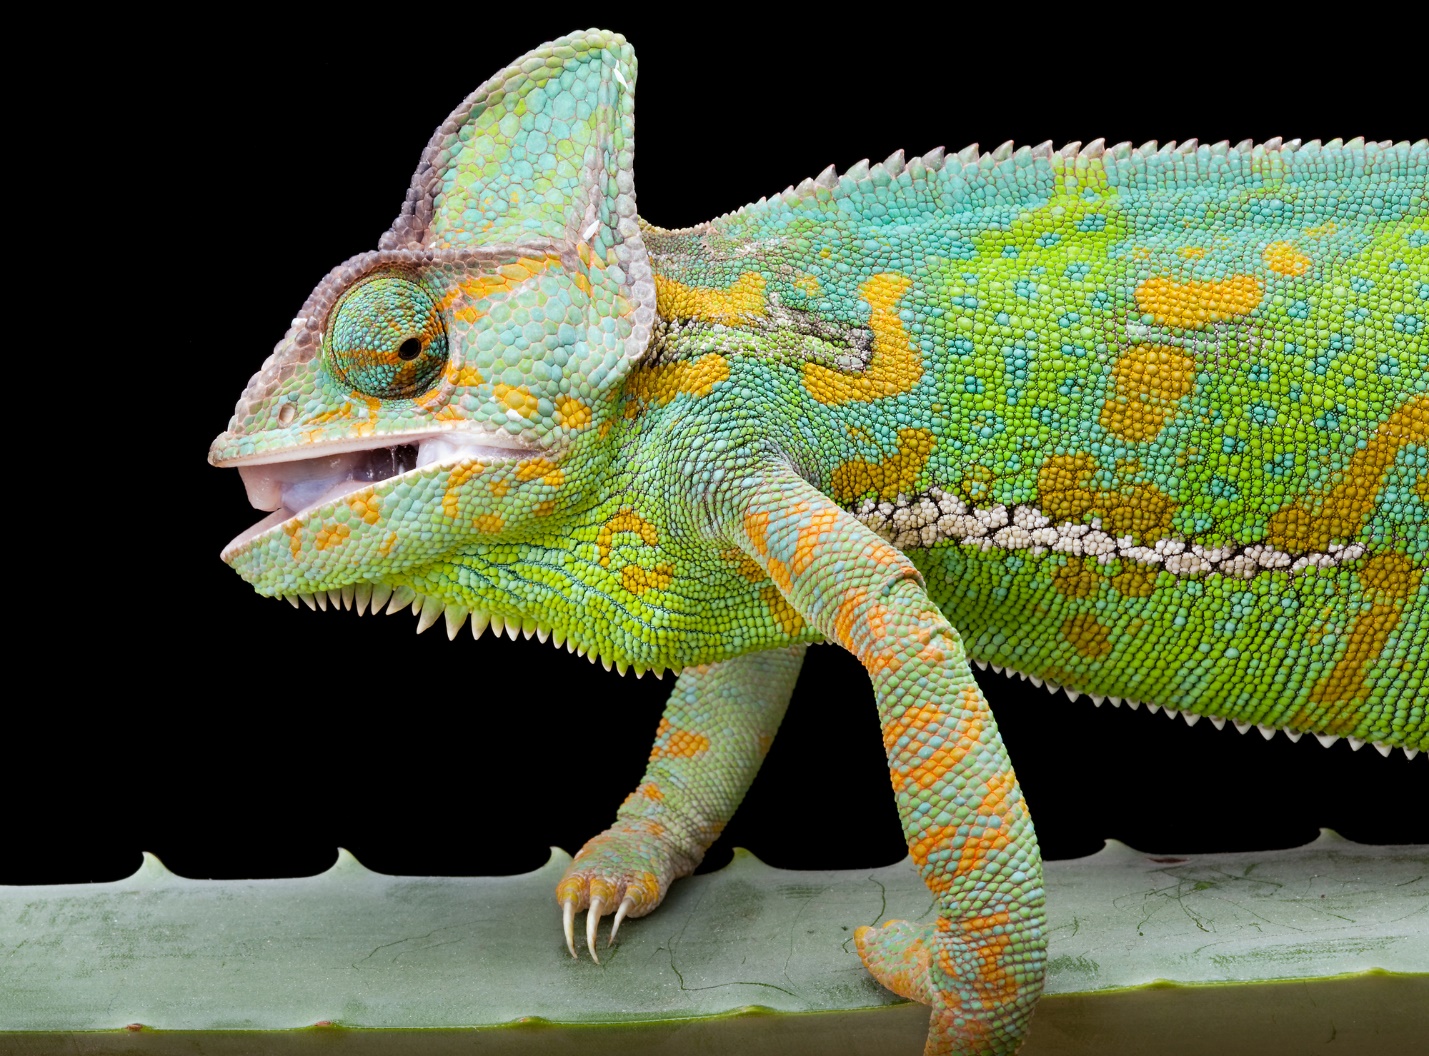 A picture containing reptile, lizard, colorful

Description automatically generated